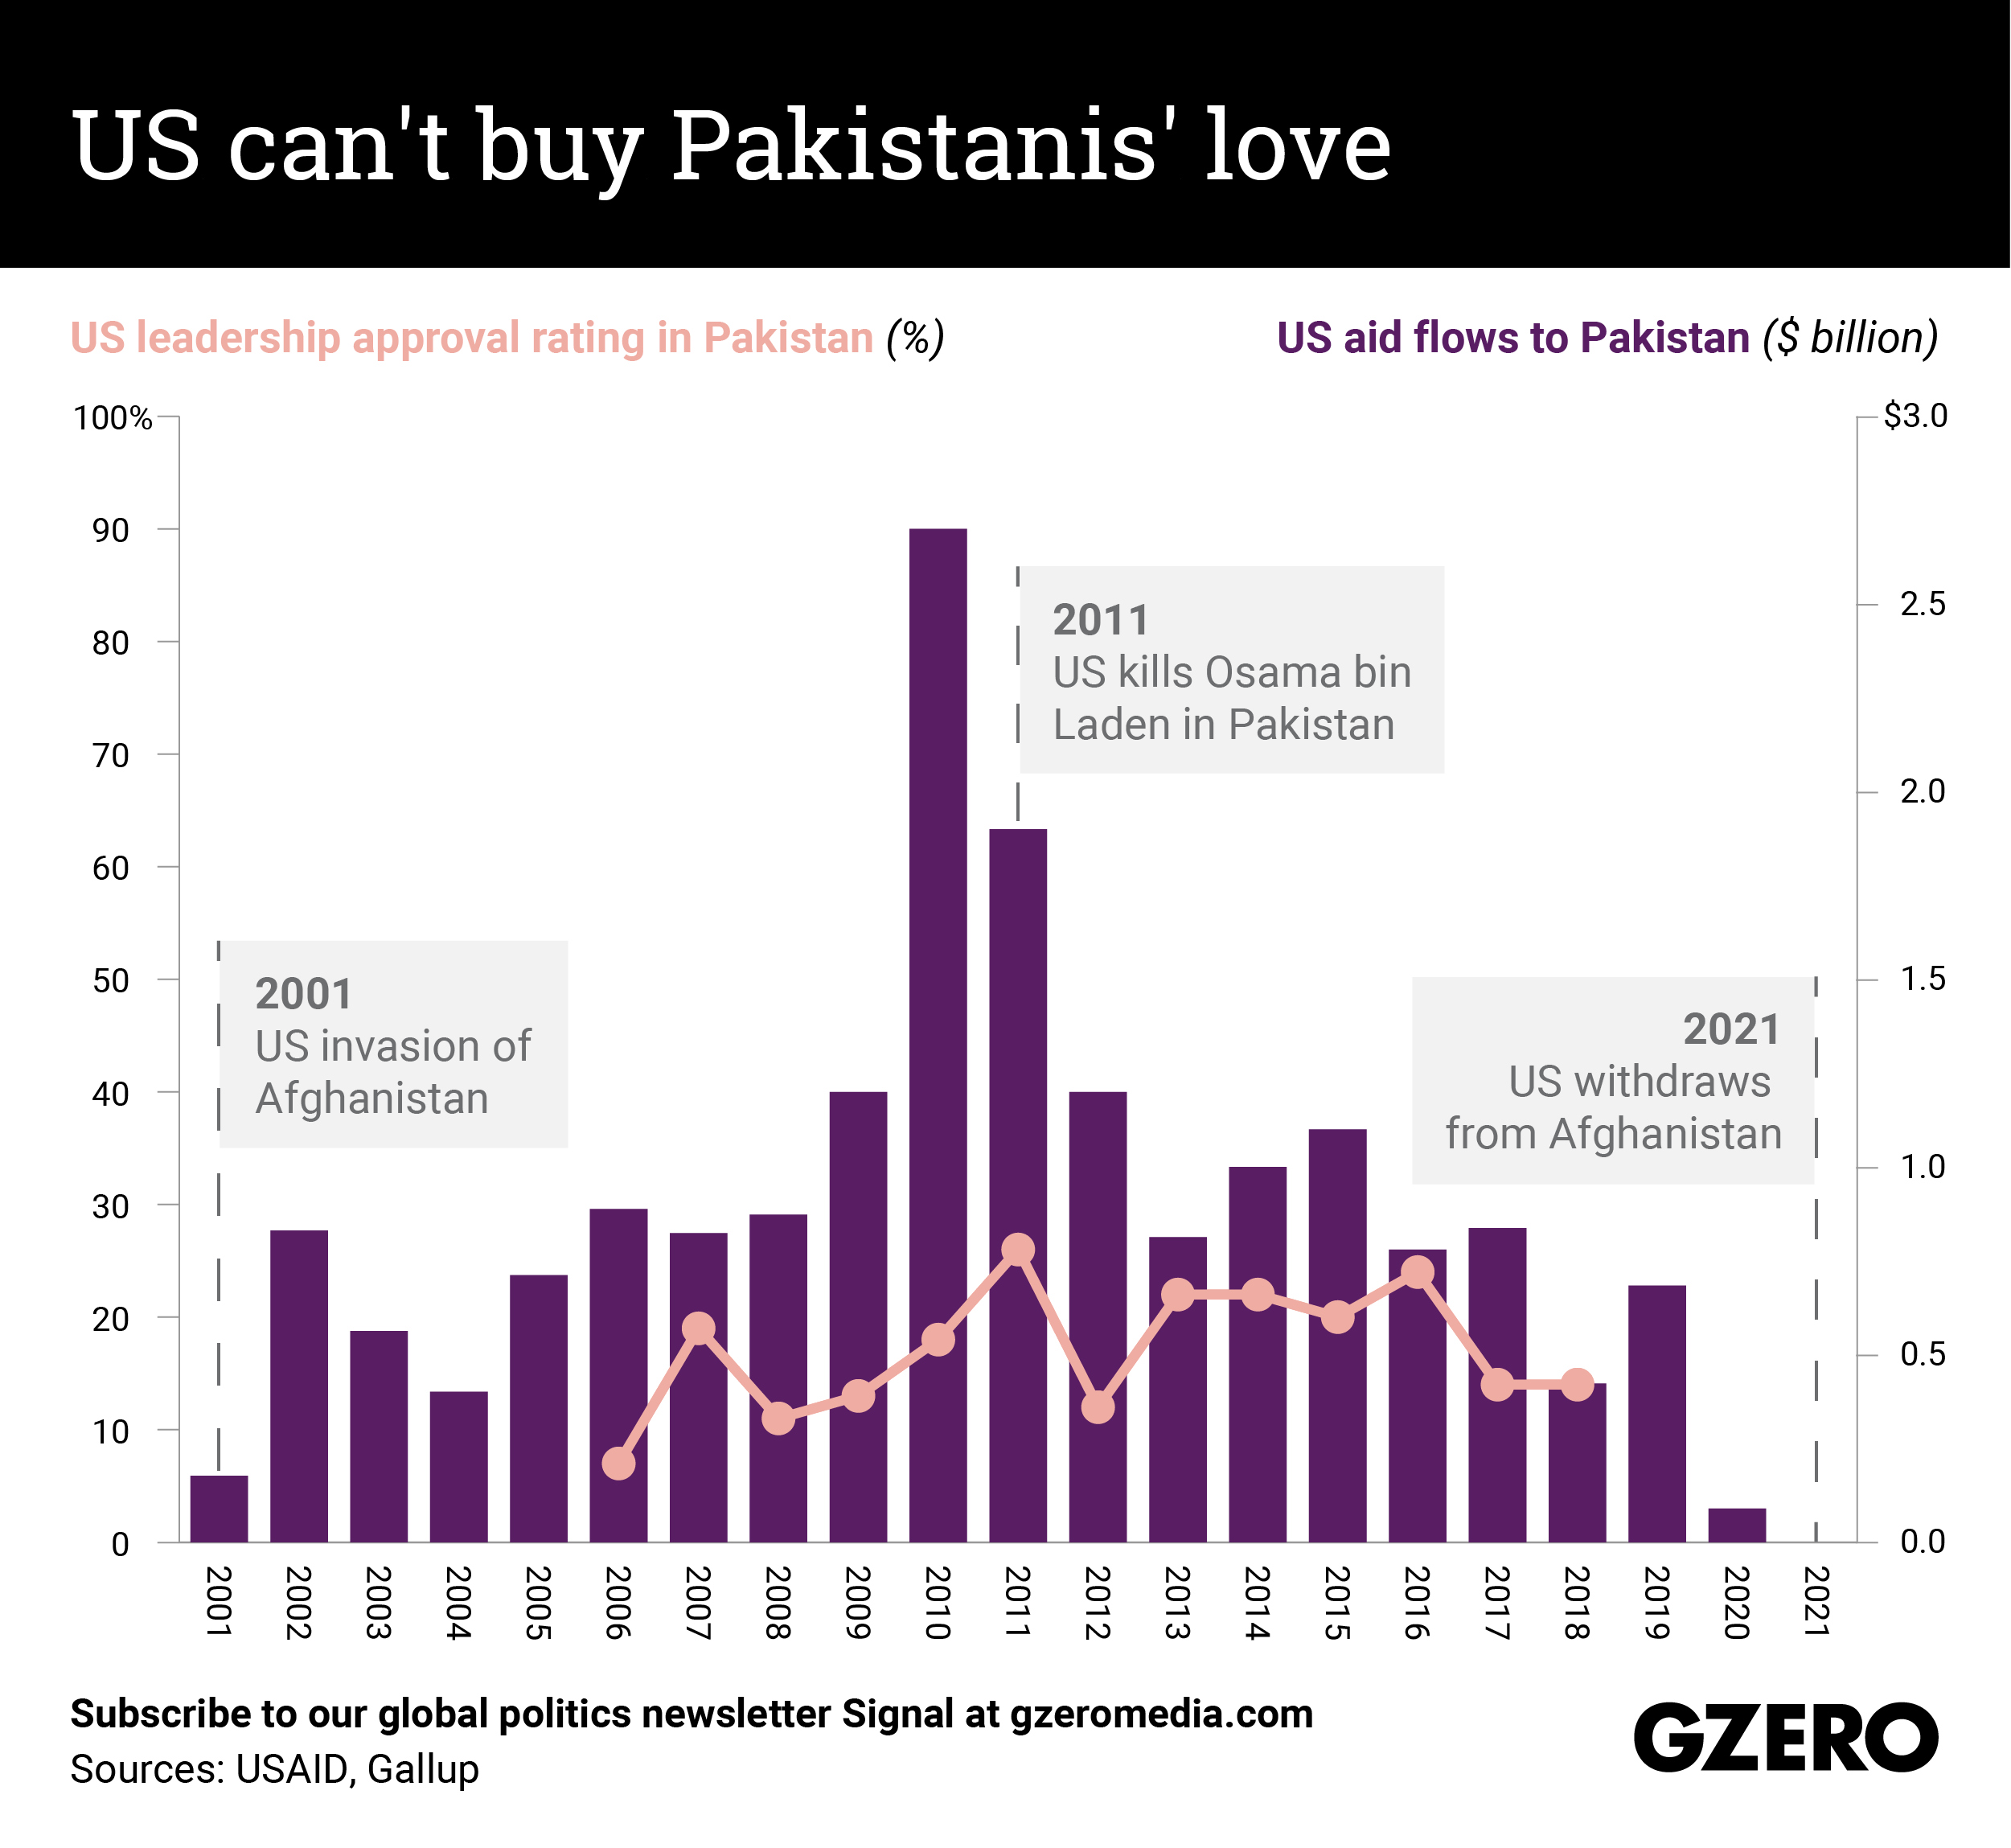 The Graphic Truth: The US can't buy Pakistanis' love